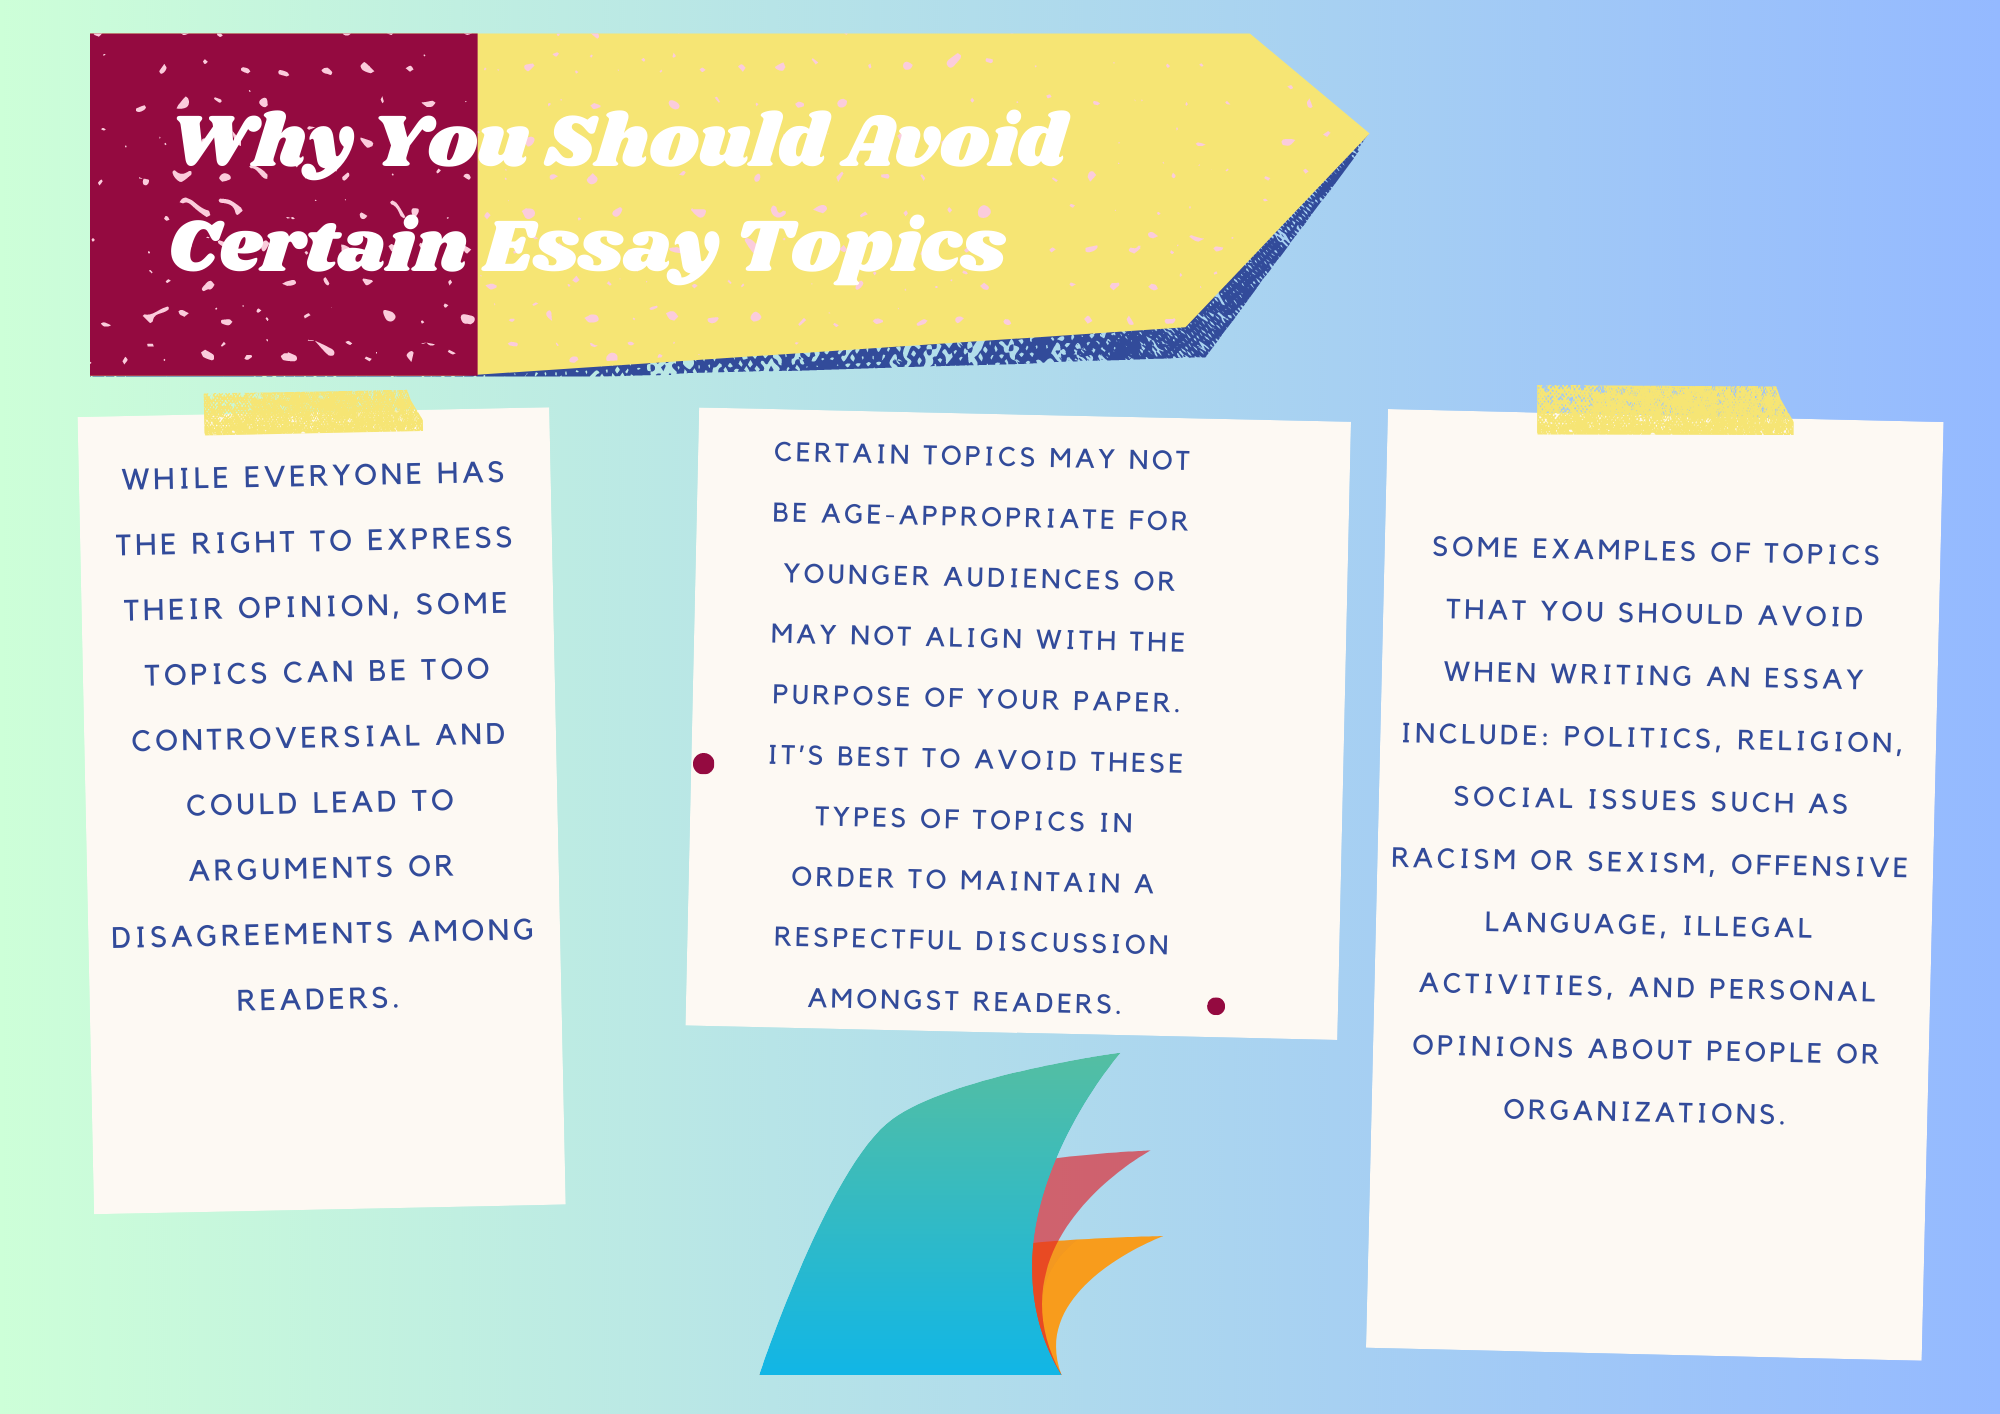 Why You Should Avoid Certain Essay Topics